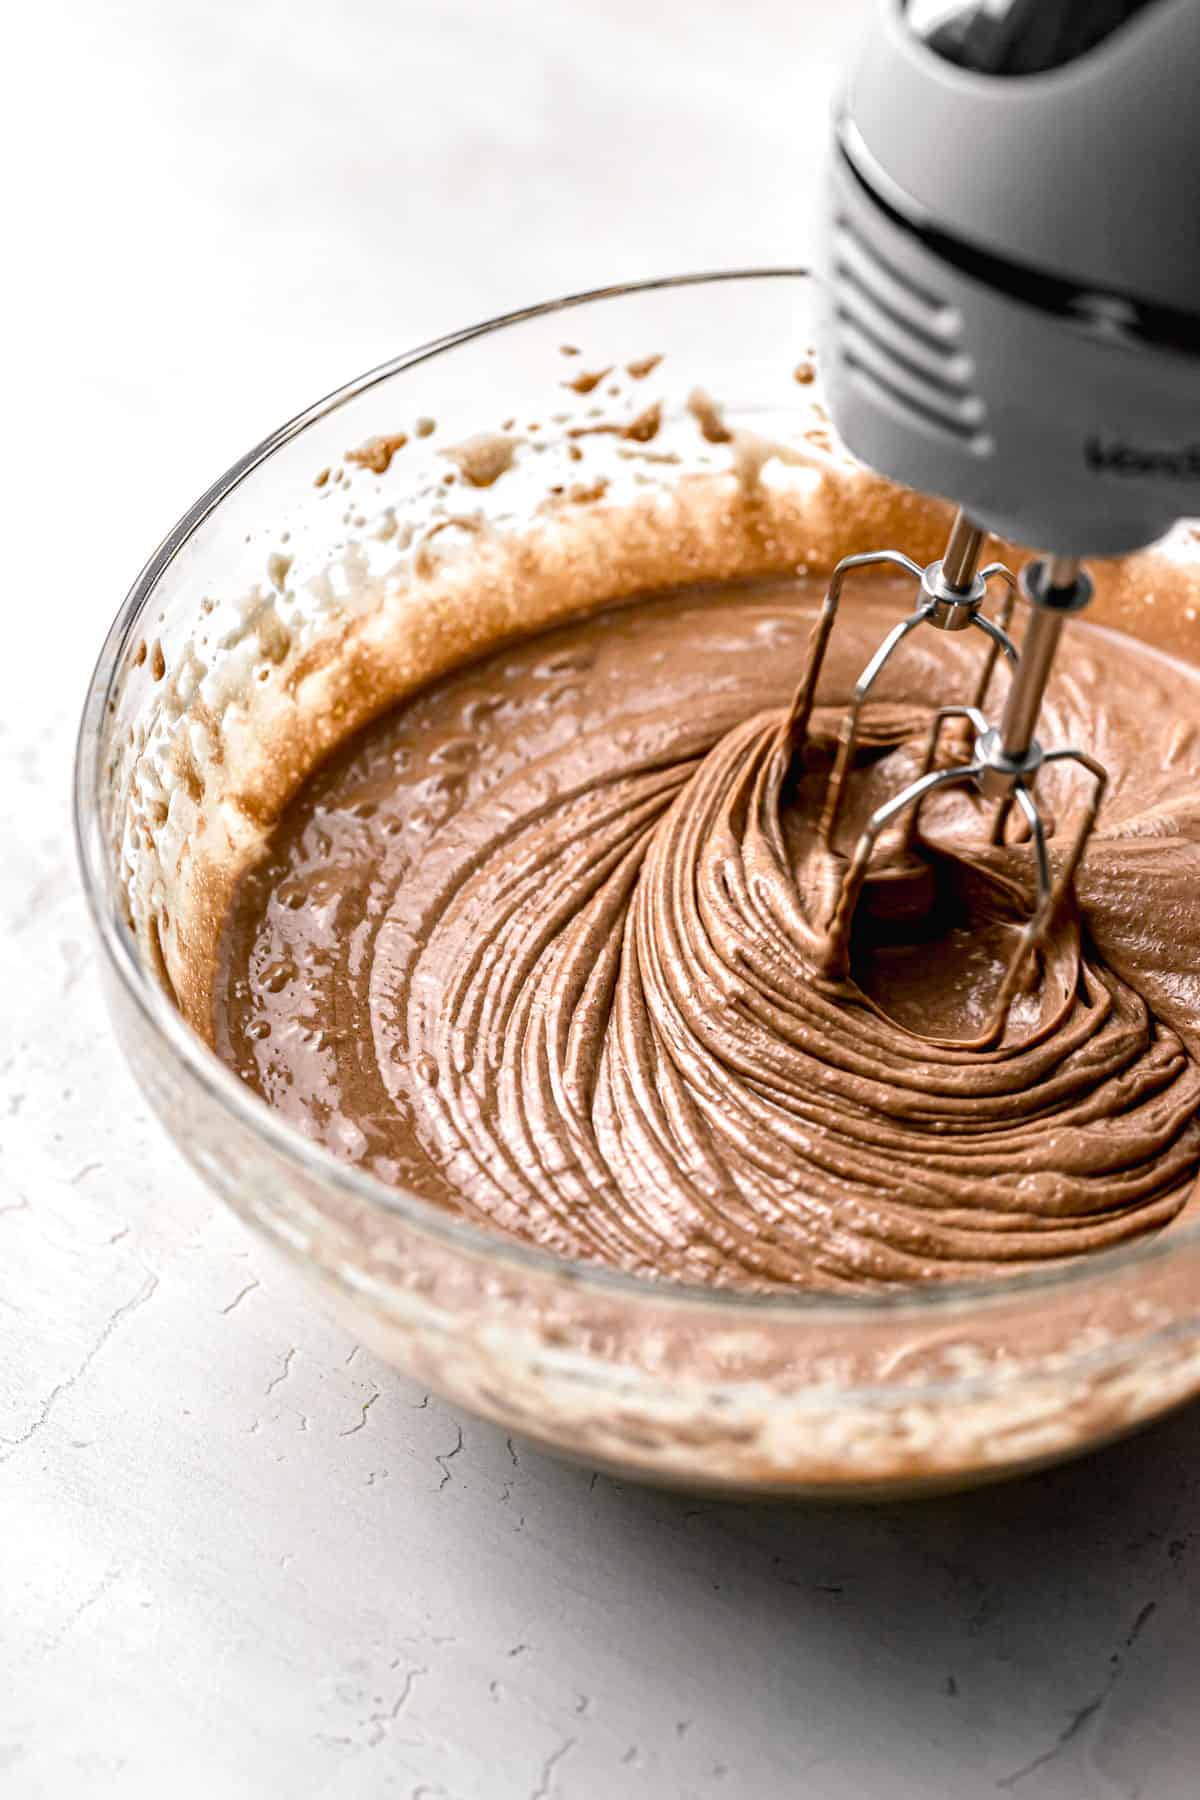 melted chocolate being mixed into batter